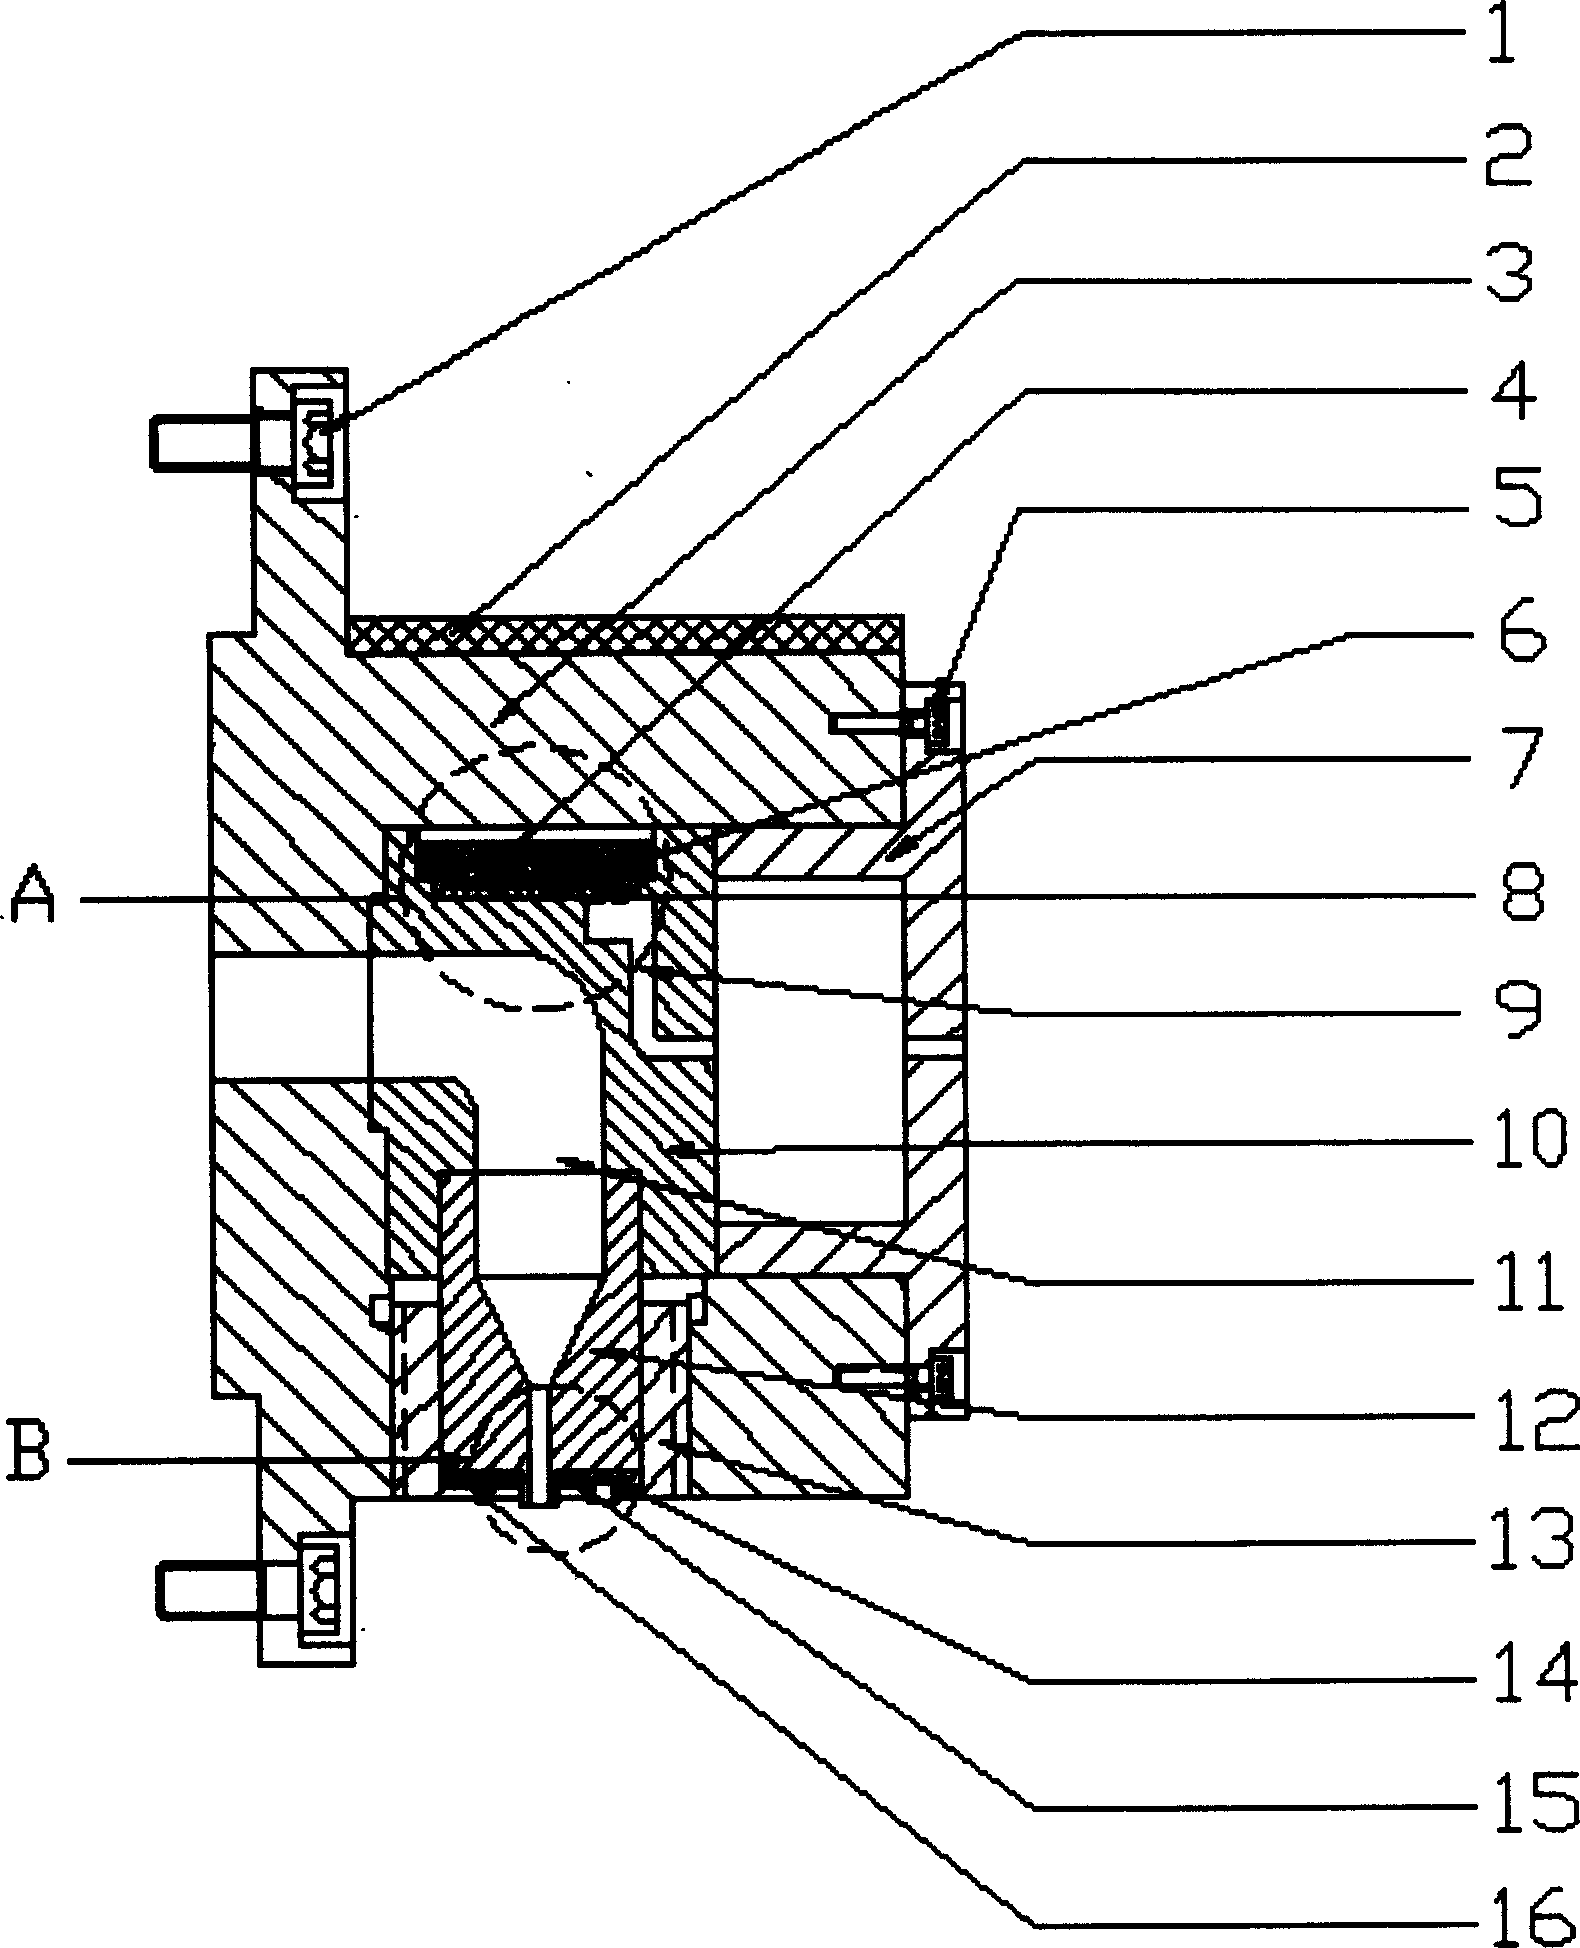 Electric field type polymer extruder head